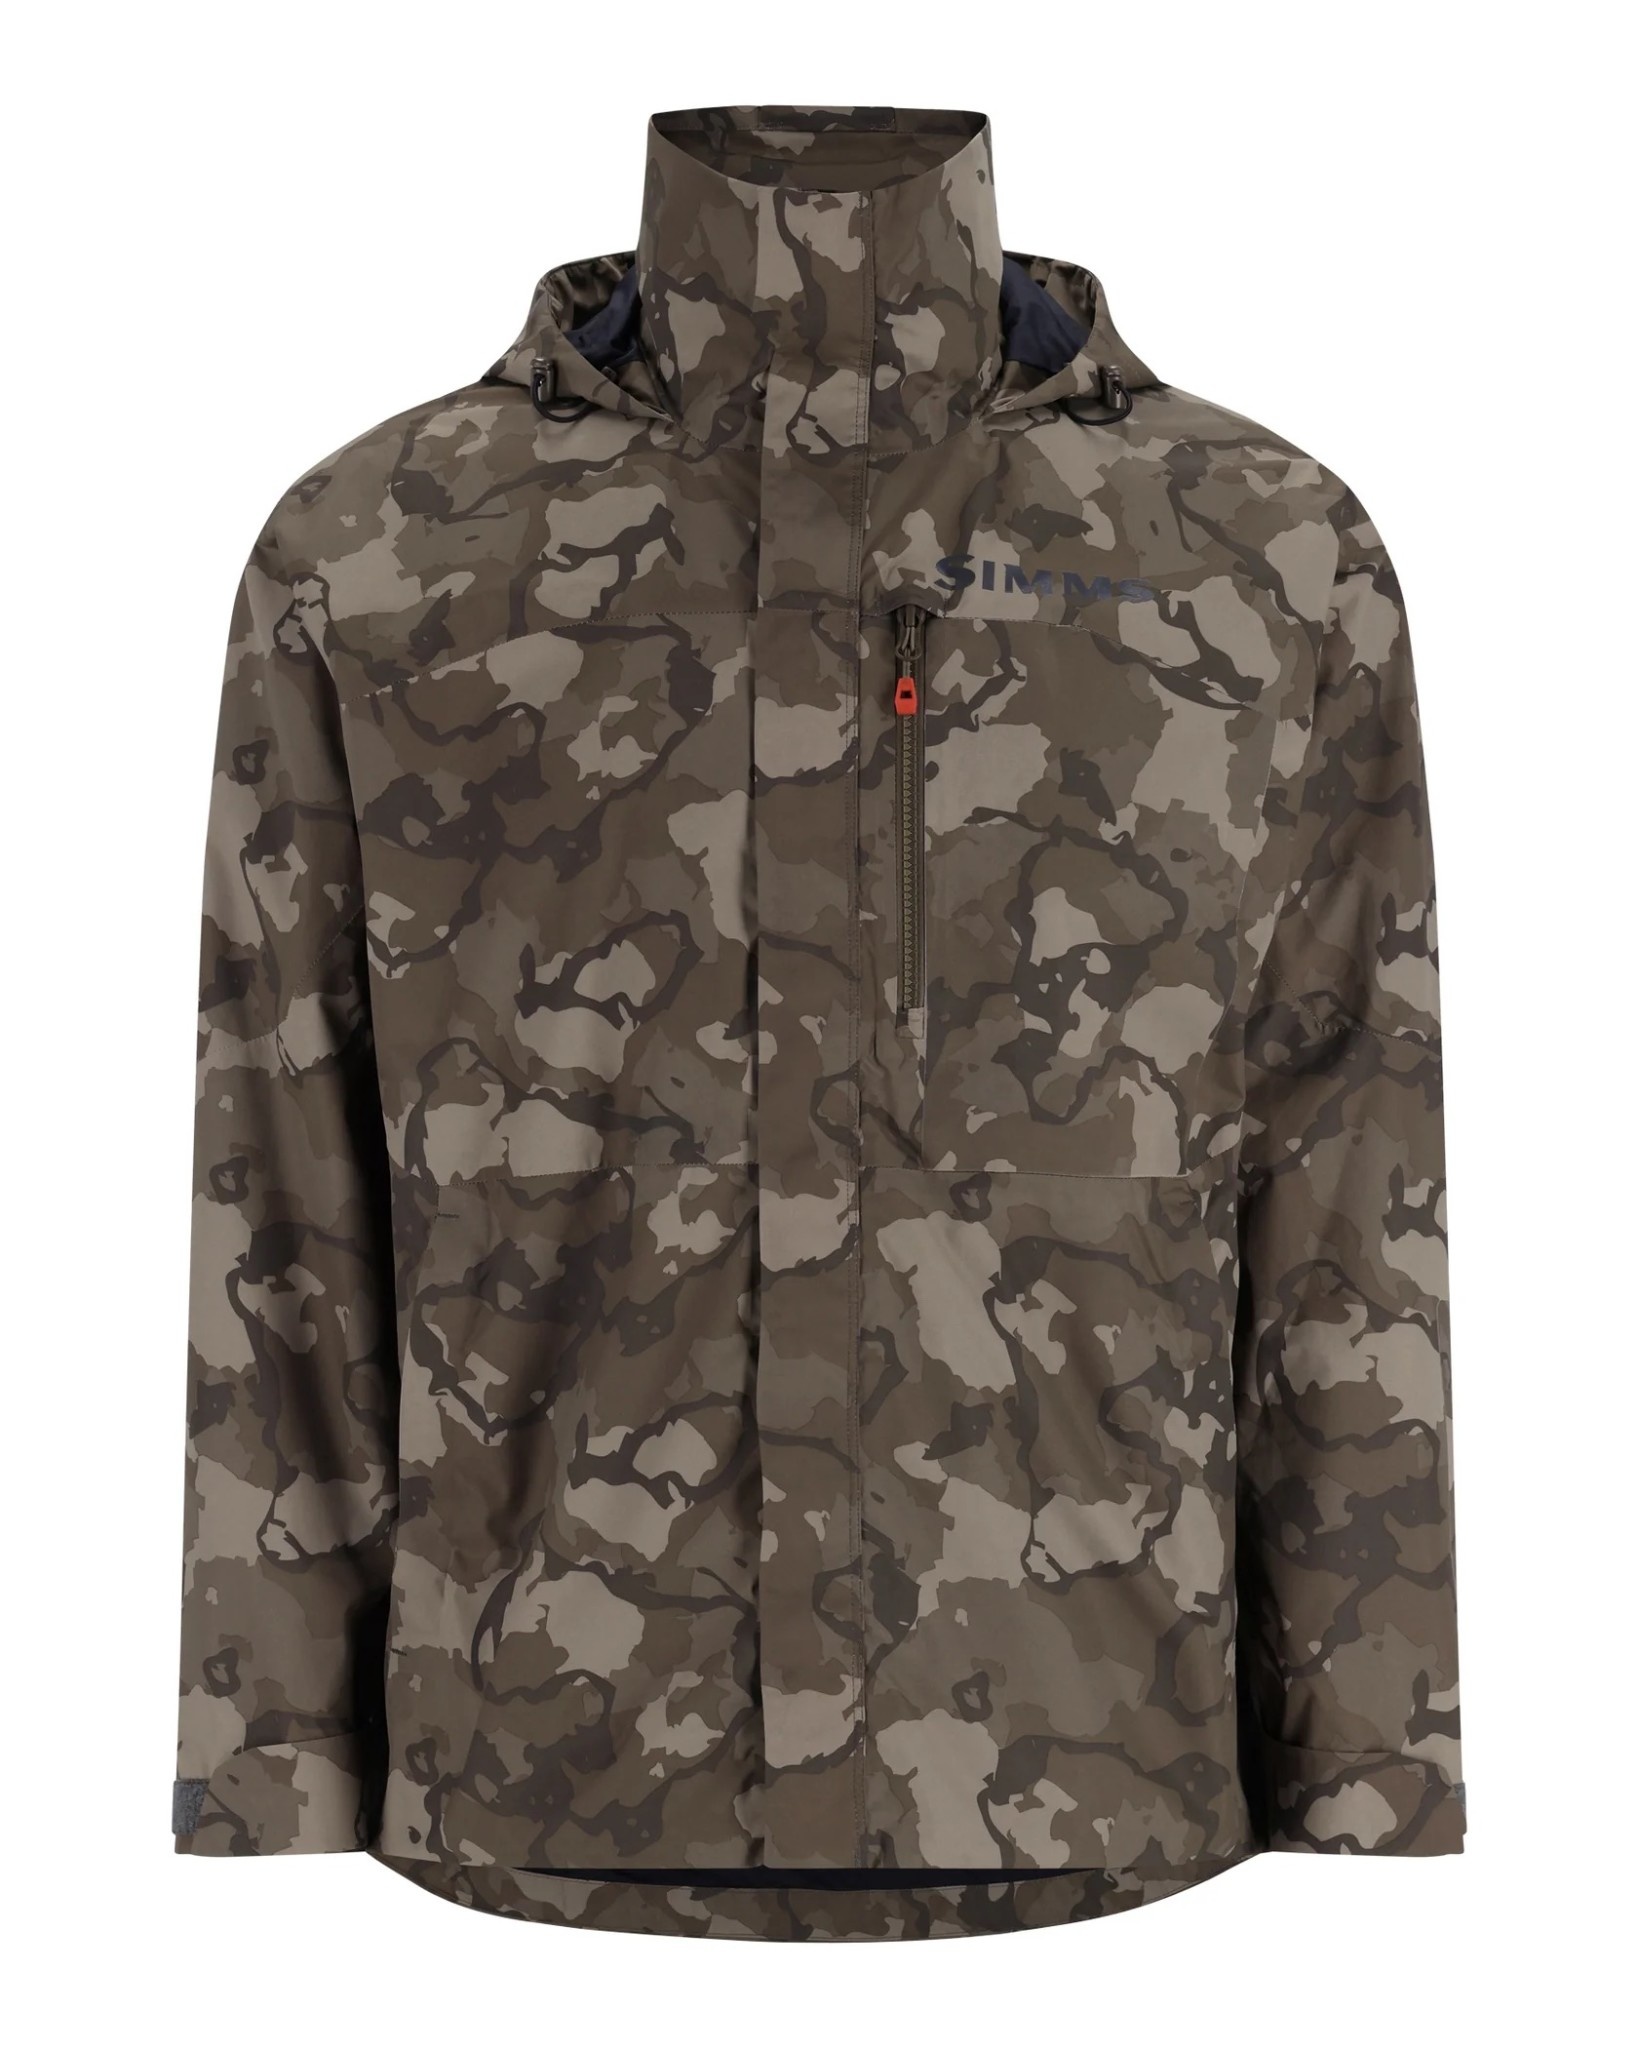 Simms M's Challenger Jacket - Gagnon Sporting Goods